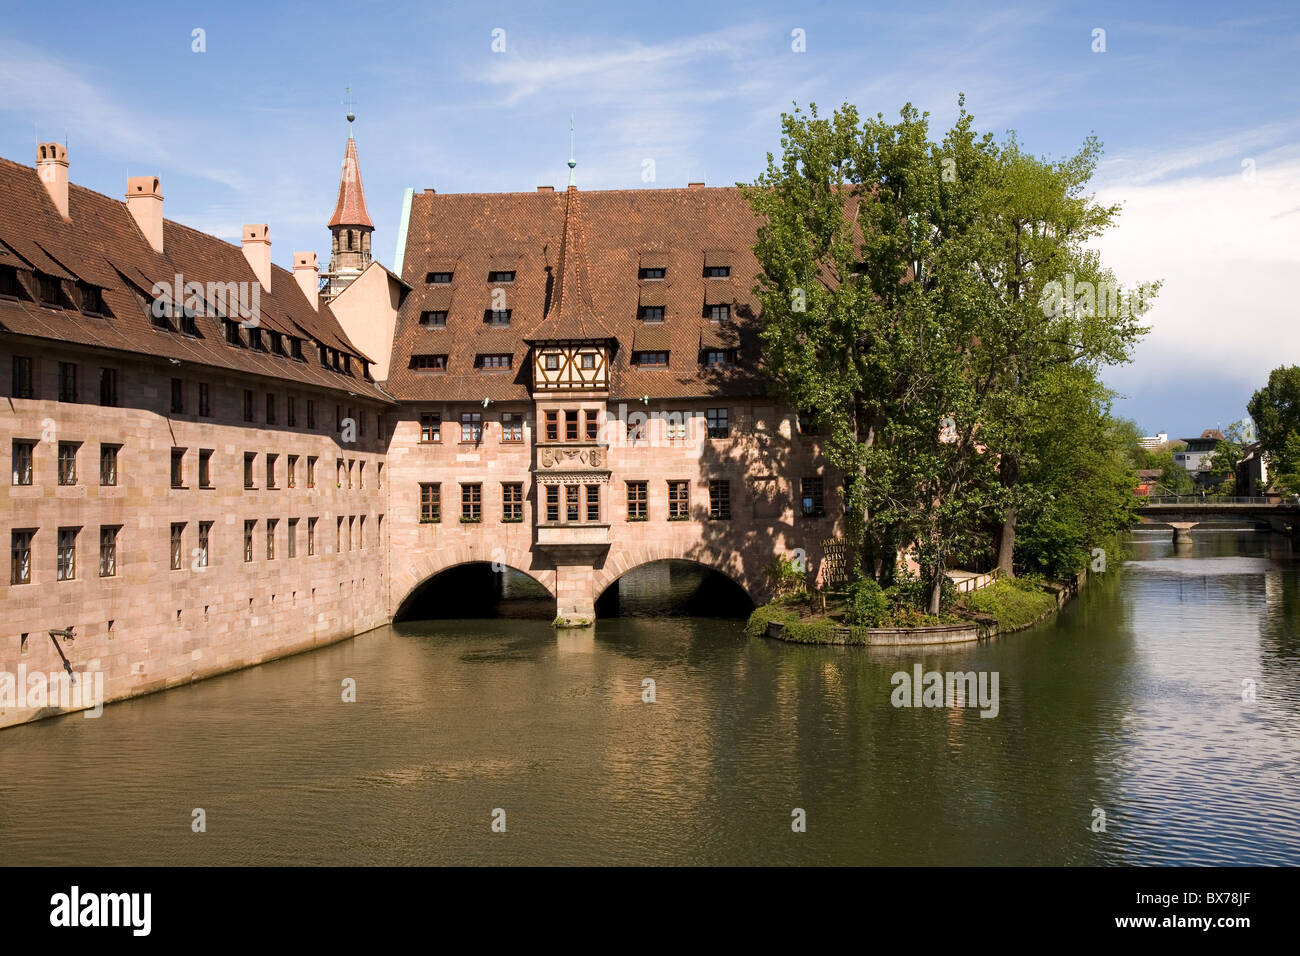 The Holy Ghost Hospital, one of Europe's largest medieval hospitals, by the river Pegnitz in Nuremberga, German Stock Photo